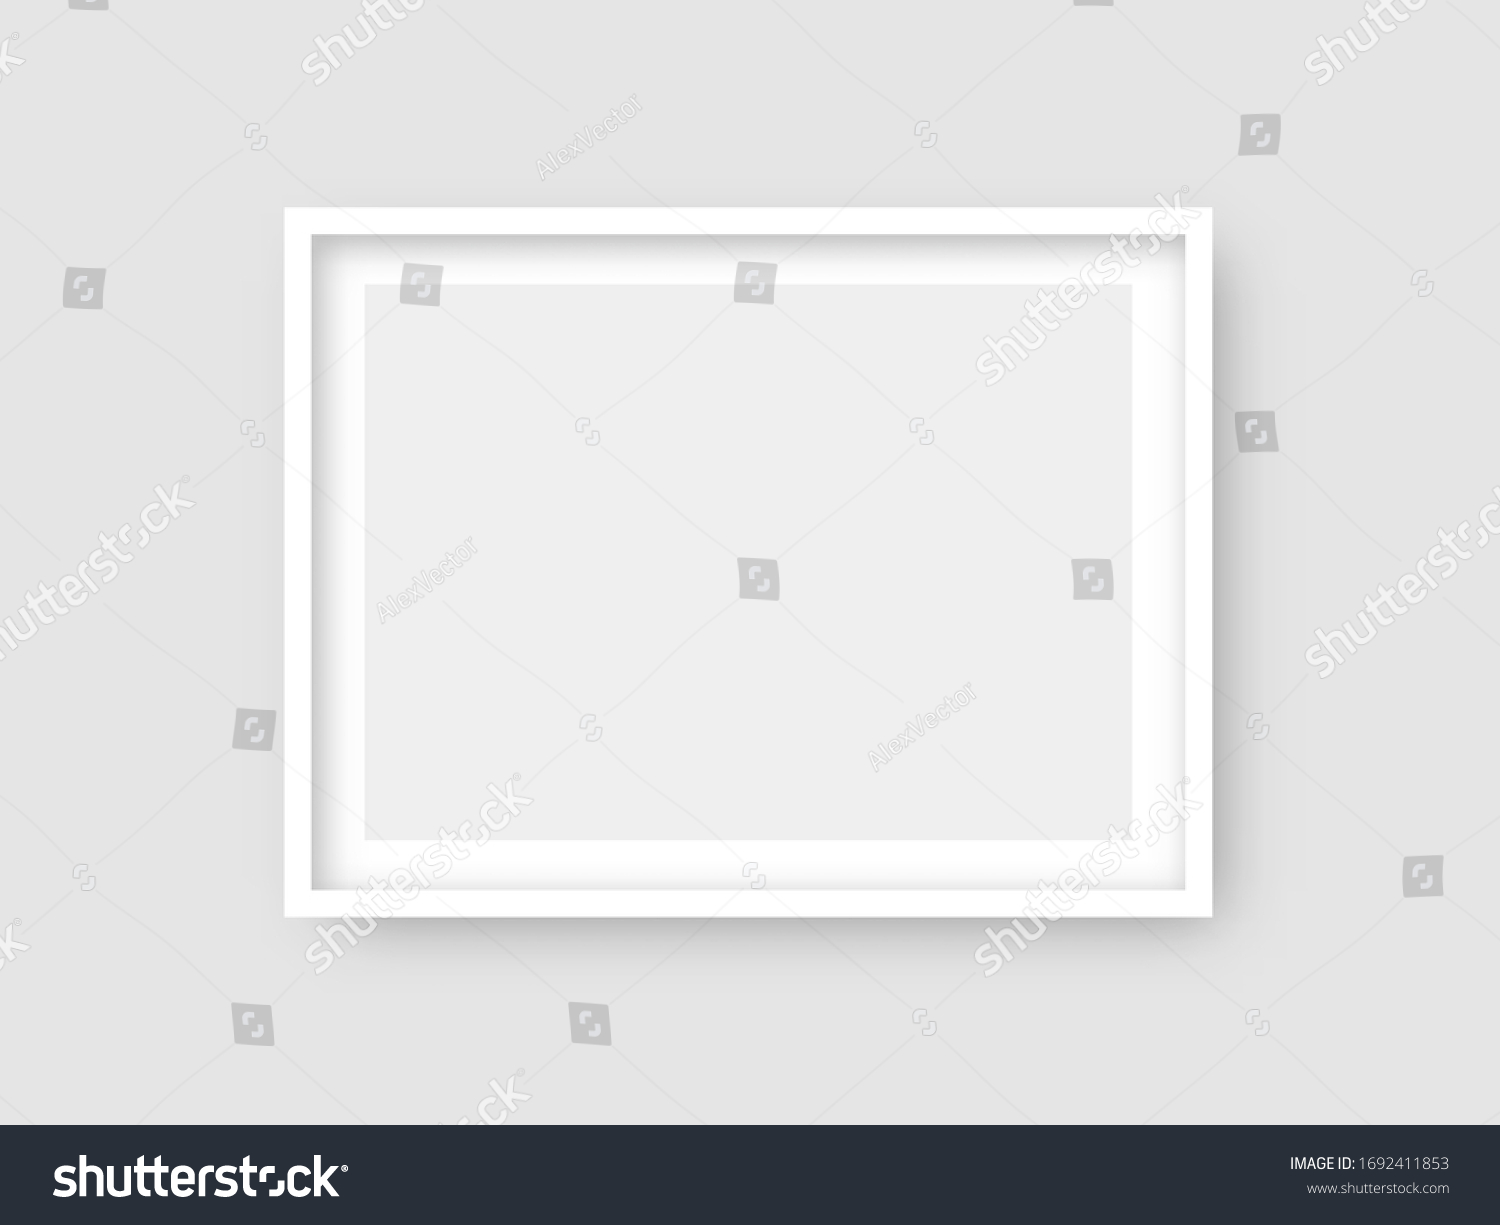 Rectangular wall picture ot photo frame mockup isolated on light background. Banner or poster template, decorative design element. Realistic vector illustration. #1692411853